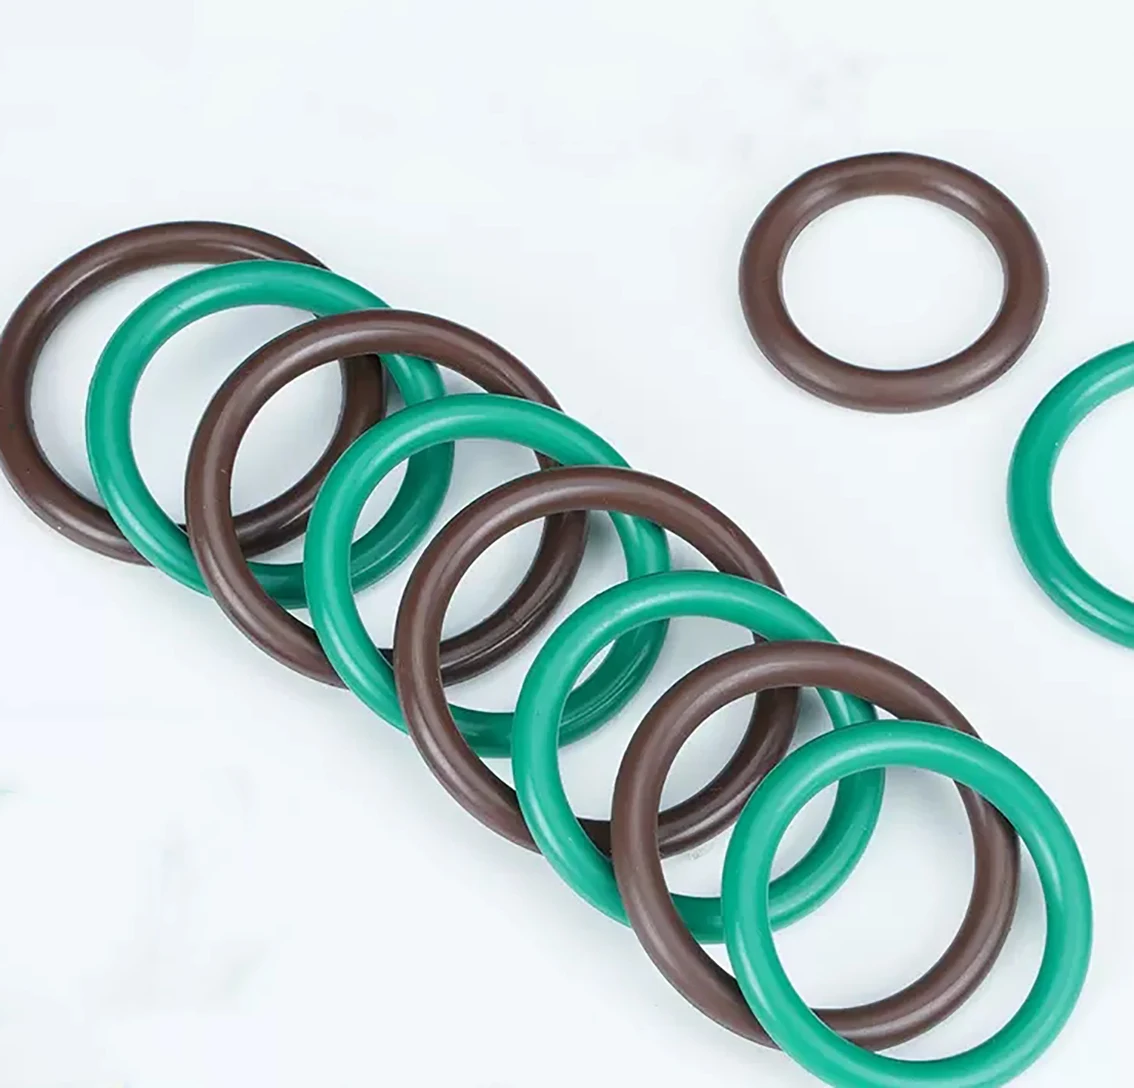 FKM CS 1.8mm Green/Brown Fluorine Rubber O Ring Gaskets ID 1.8/2/2.24/2.5/3/3.15-120mm O-Ring Oil Seals Washer